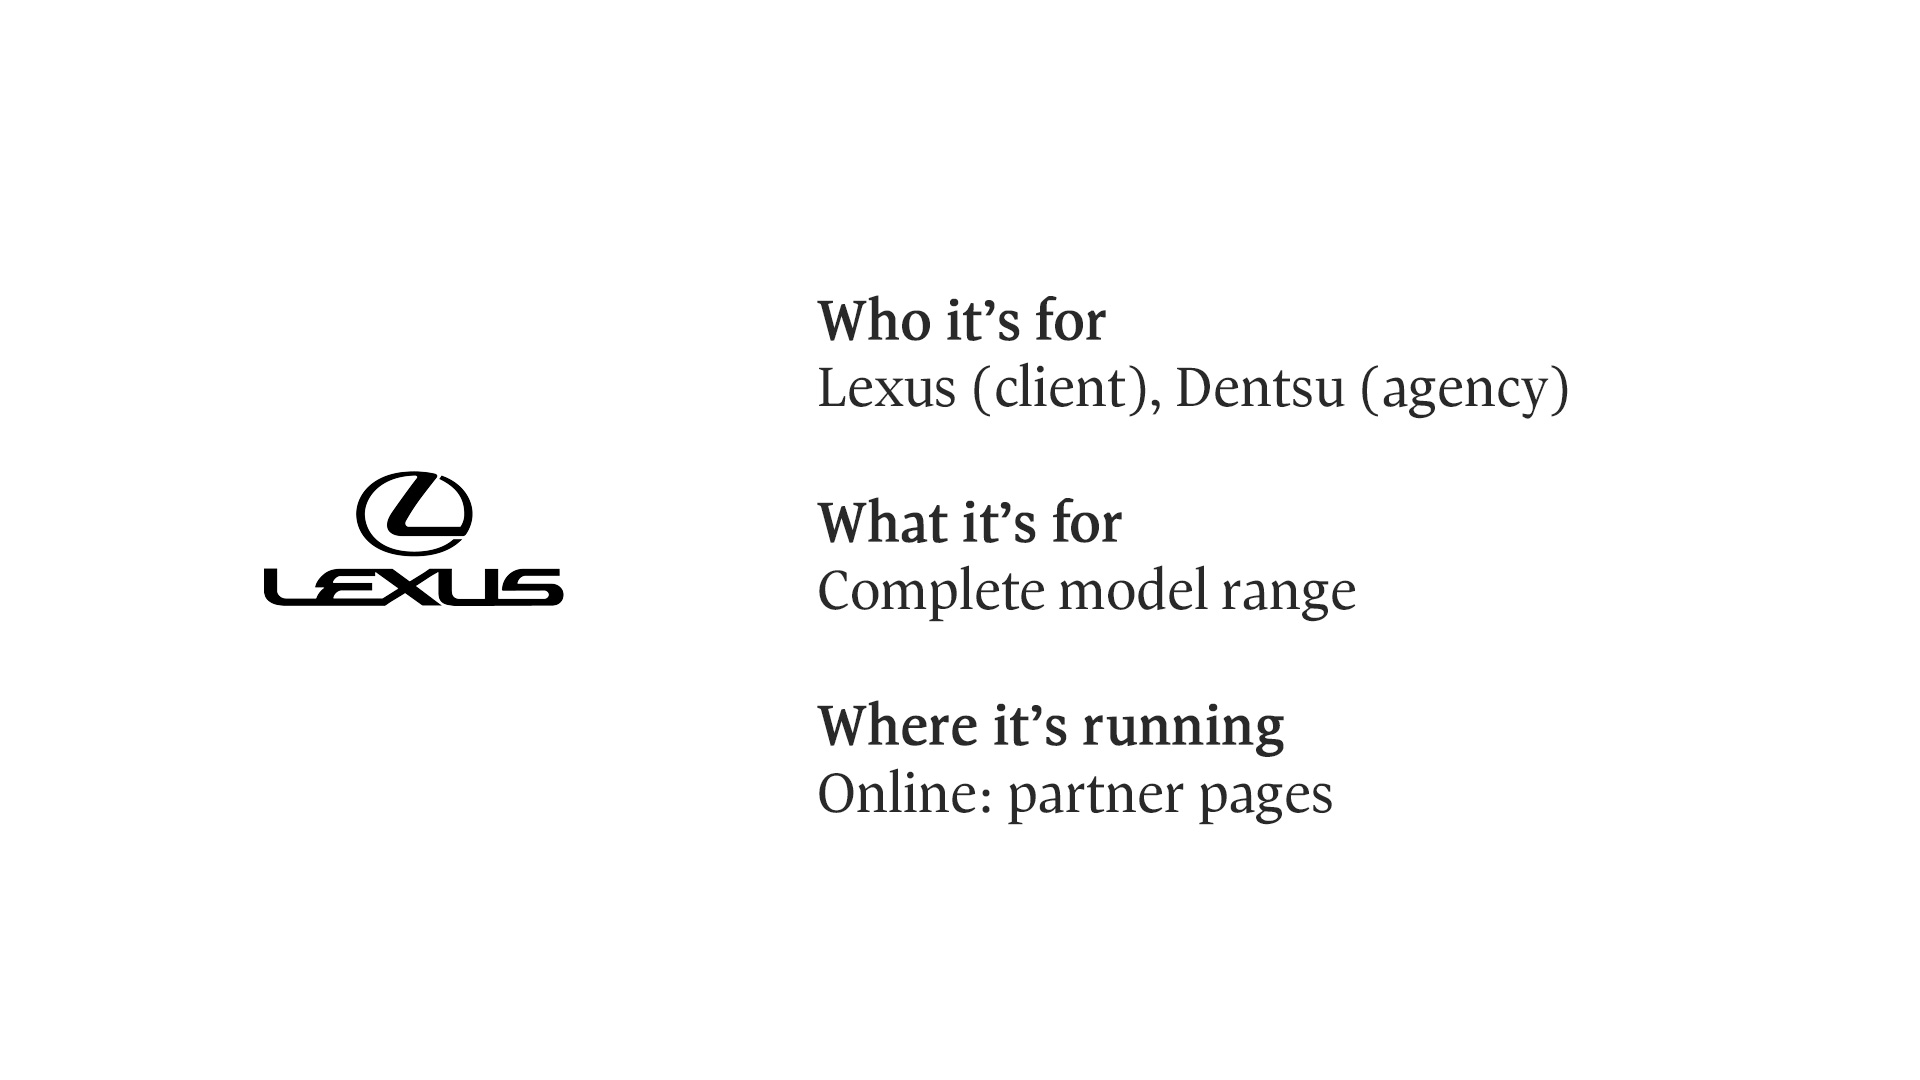 Lexus - digital custom content program with The Globe and Mail